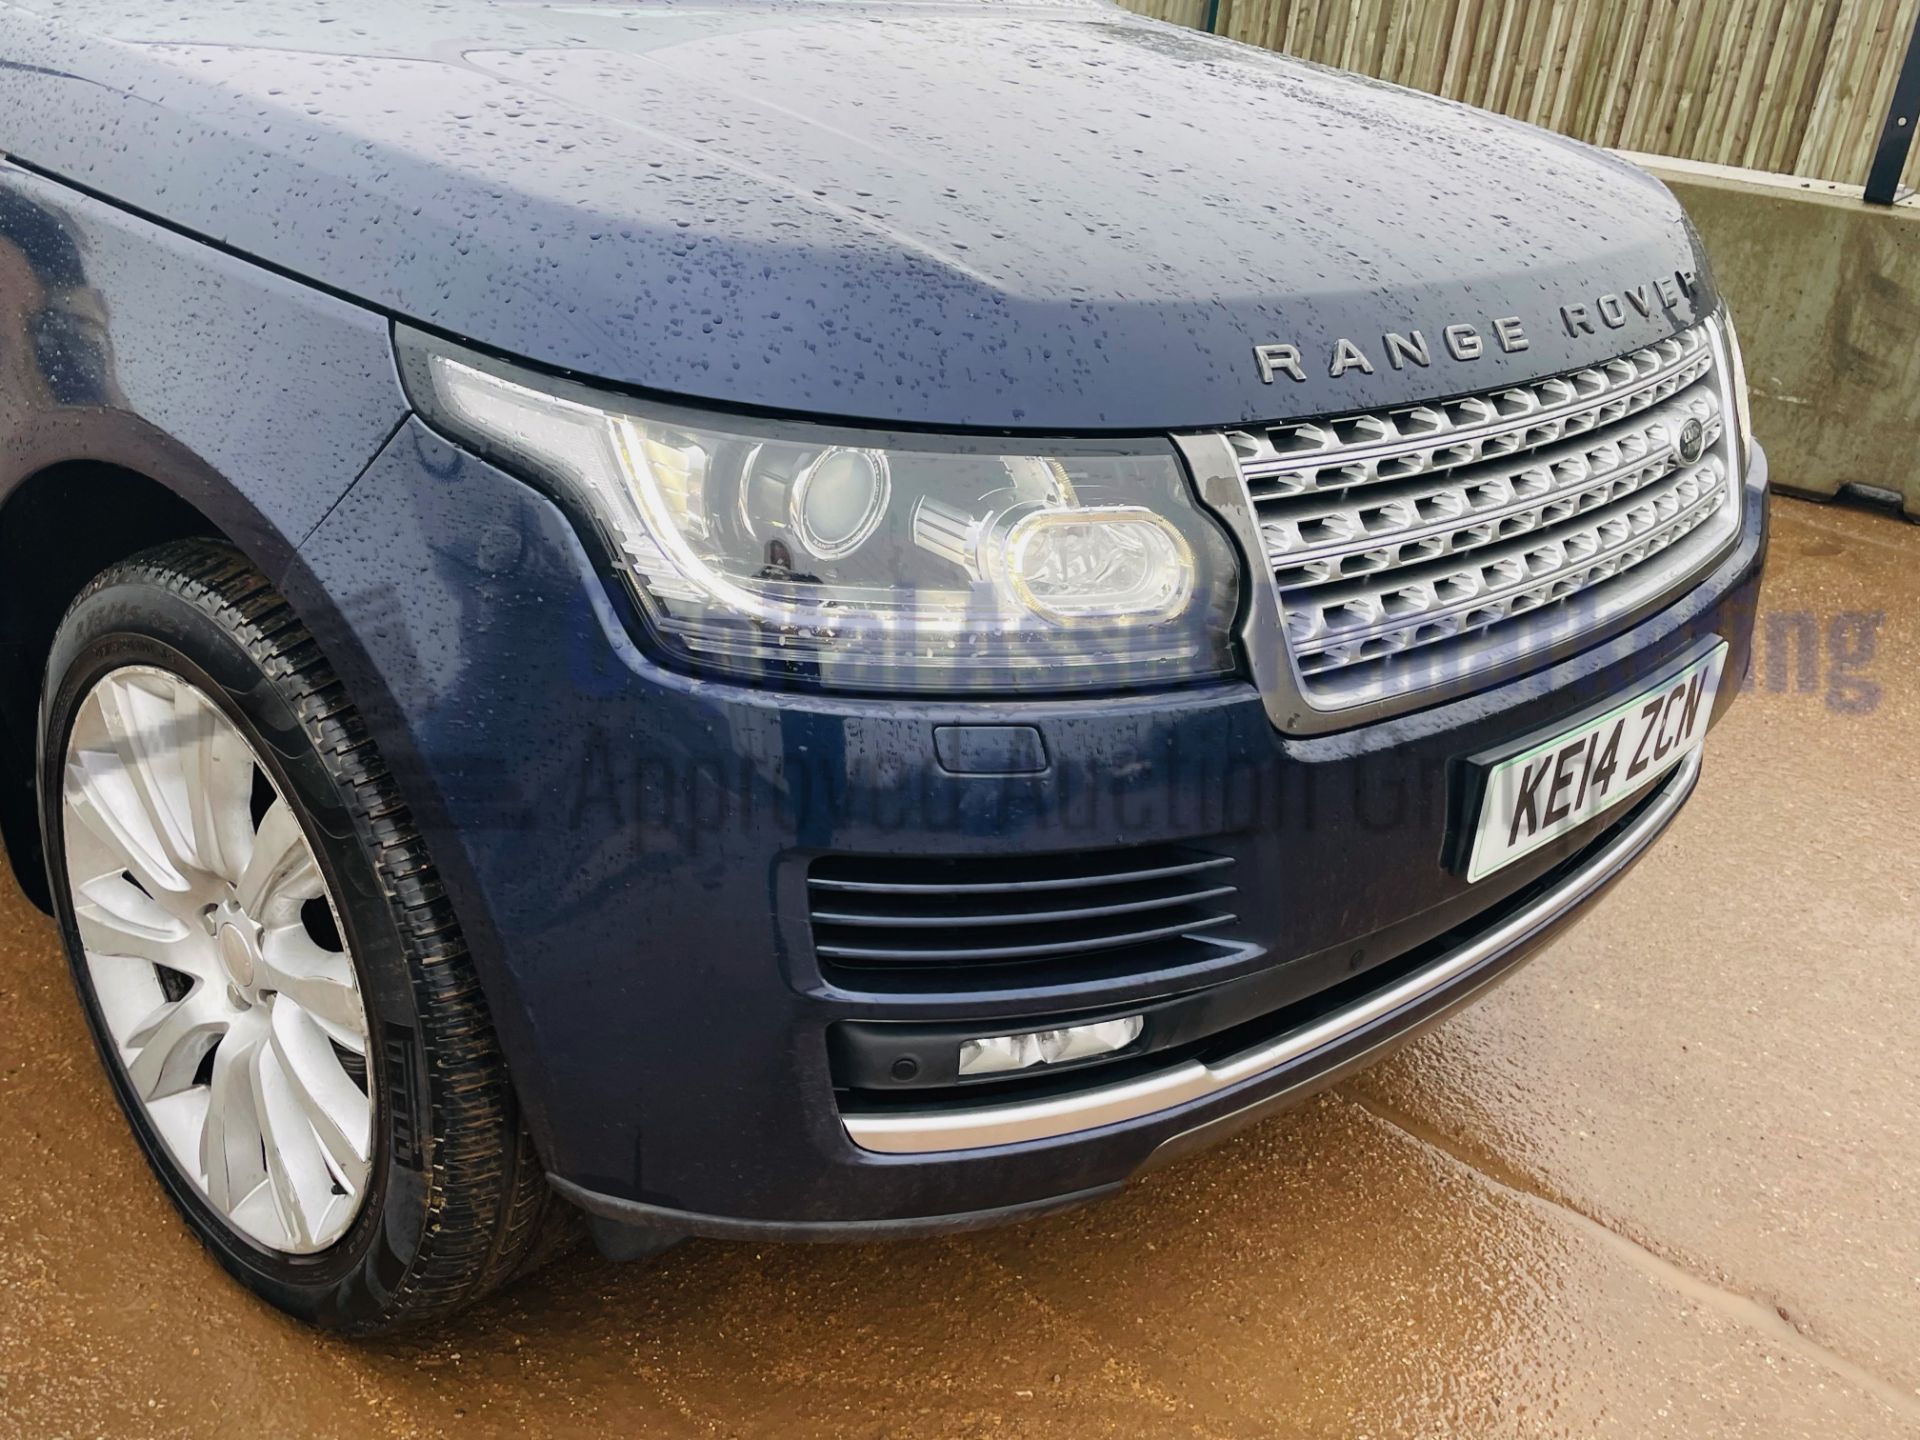 (On Sale) RANGE ROVER VOGUE *5 DOOR SUV* (2014 - NEW MODEL) '4.4 SDV8 - 8 SPEED AUTO' *FULLY LOADED* - Image 15 of 68